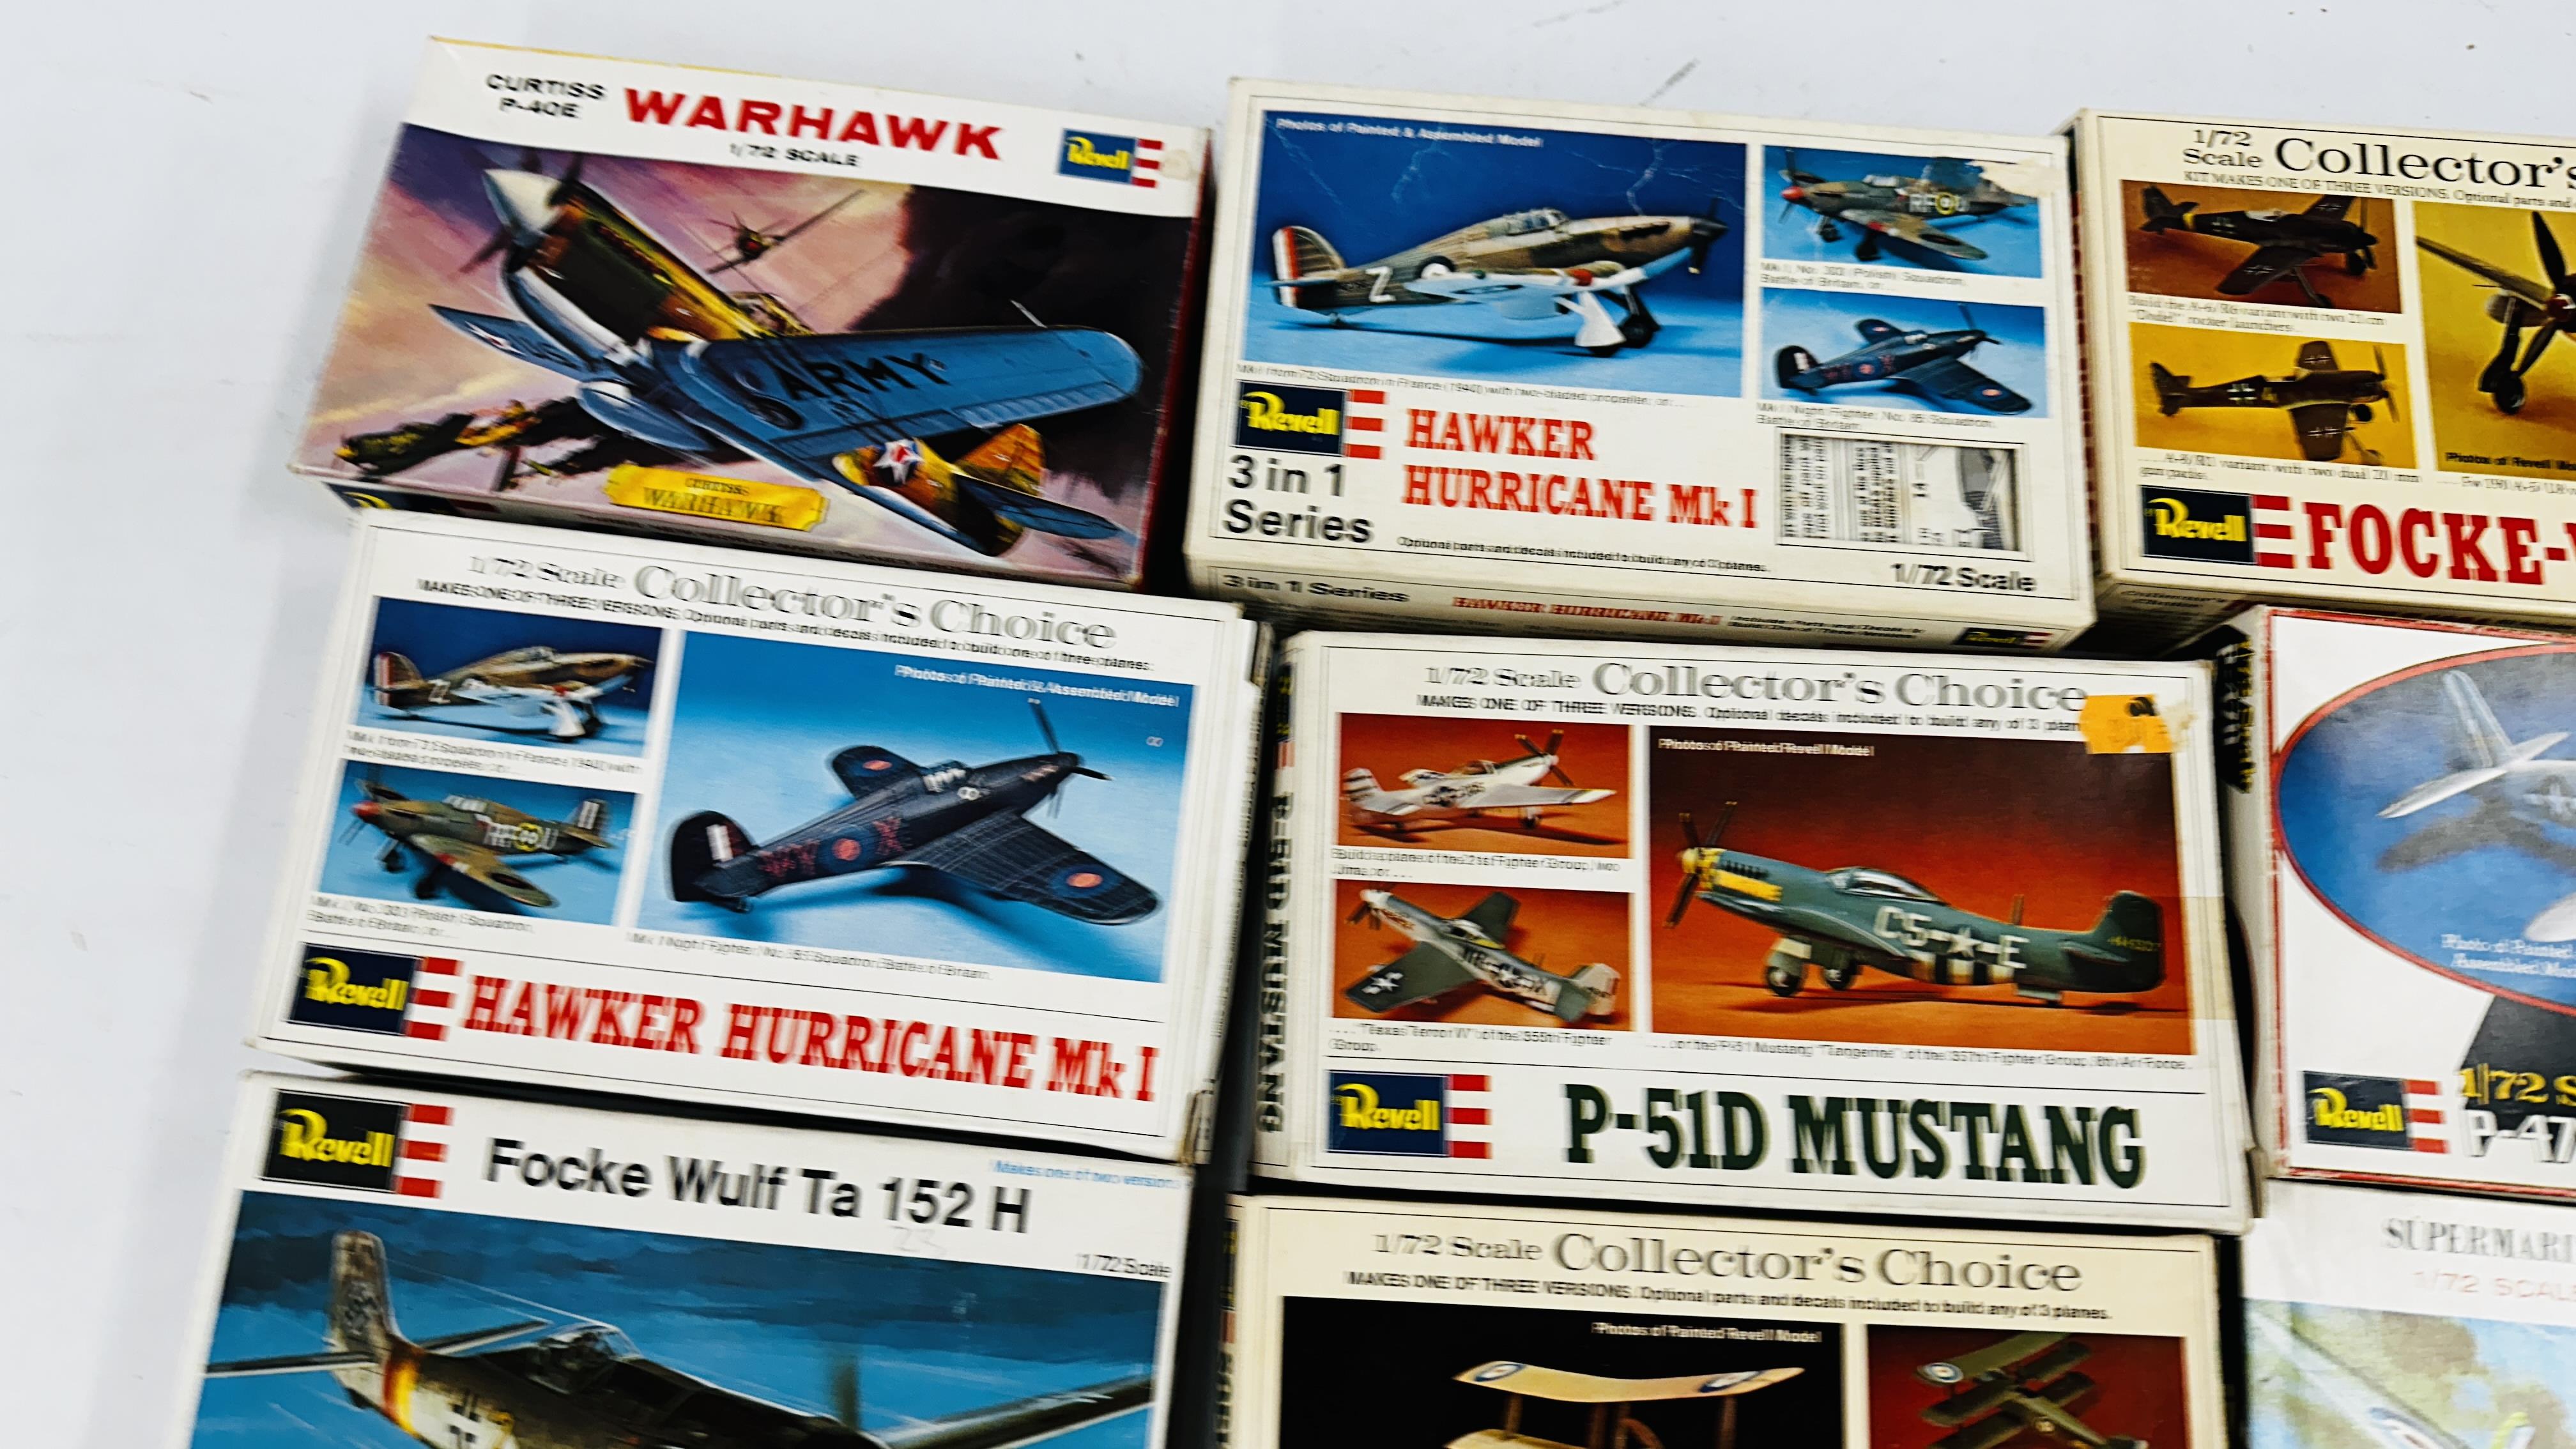 A BOX CONTAINING A COLLECTION OF 19 REVELL MODEL AIRCRAFT KITS. - Image 5 of 7